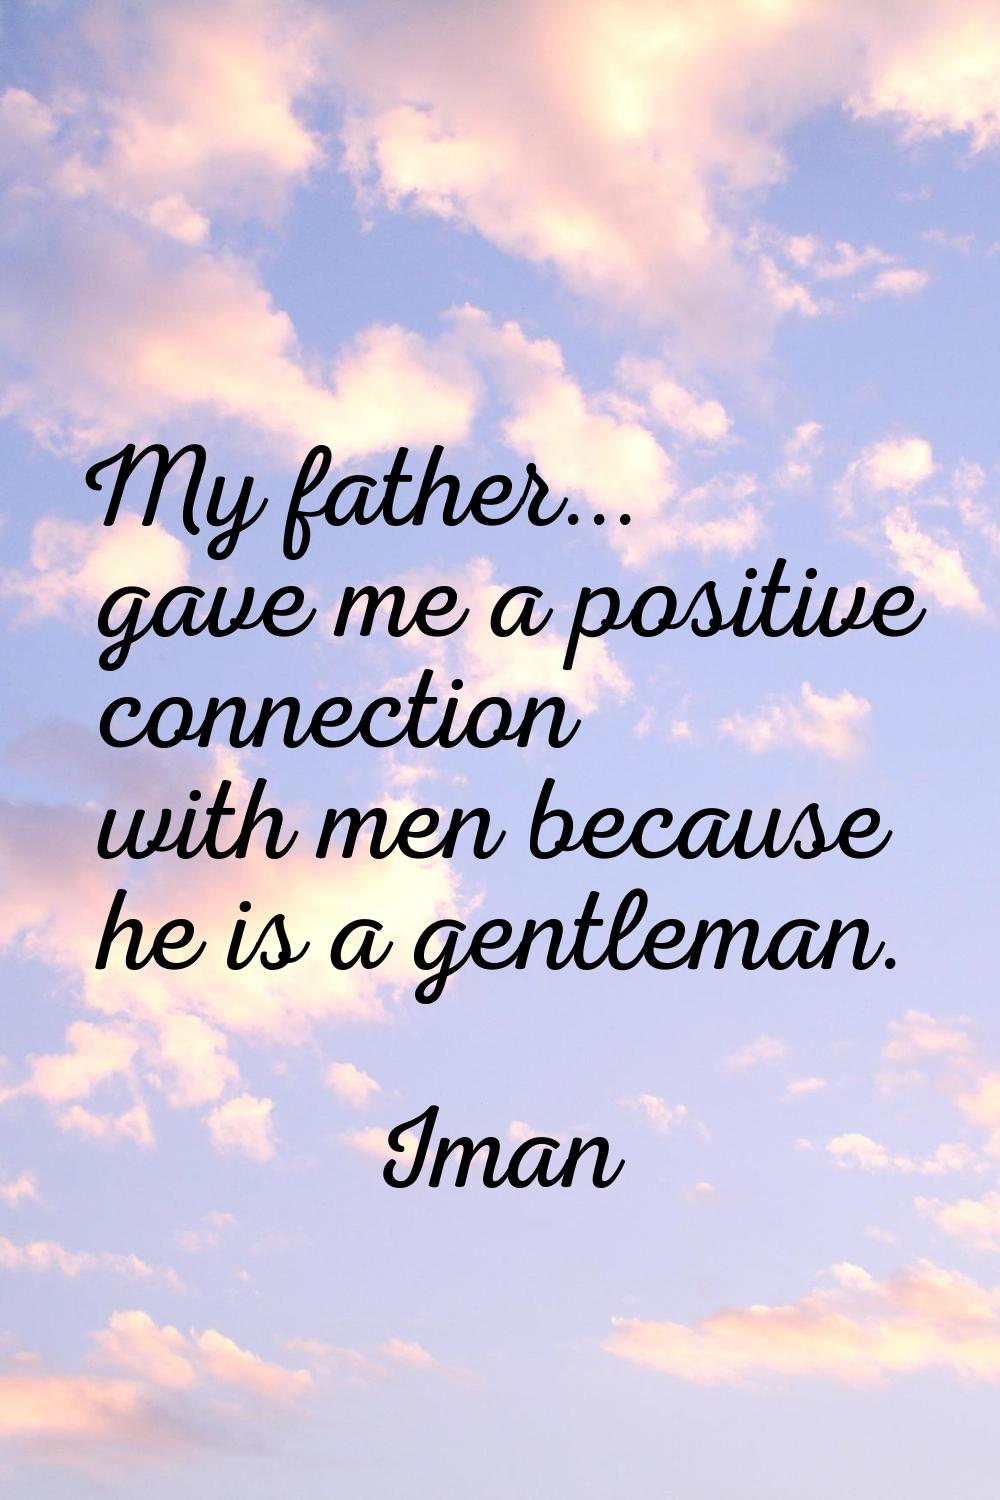 My father... gave me a positive connection with men because he is a gentleman.